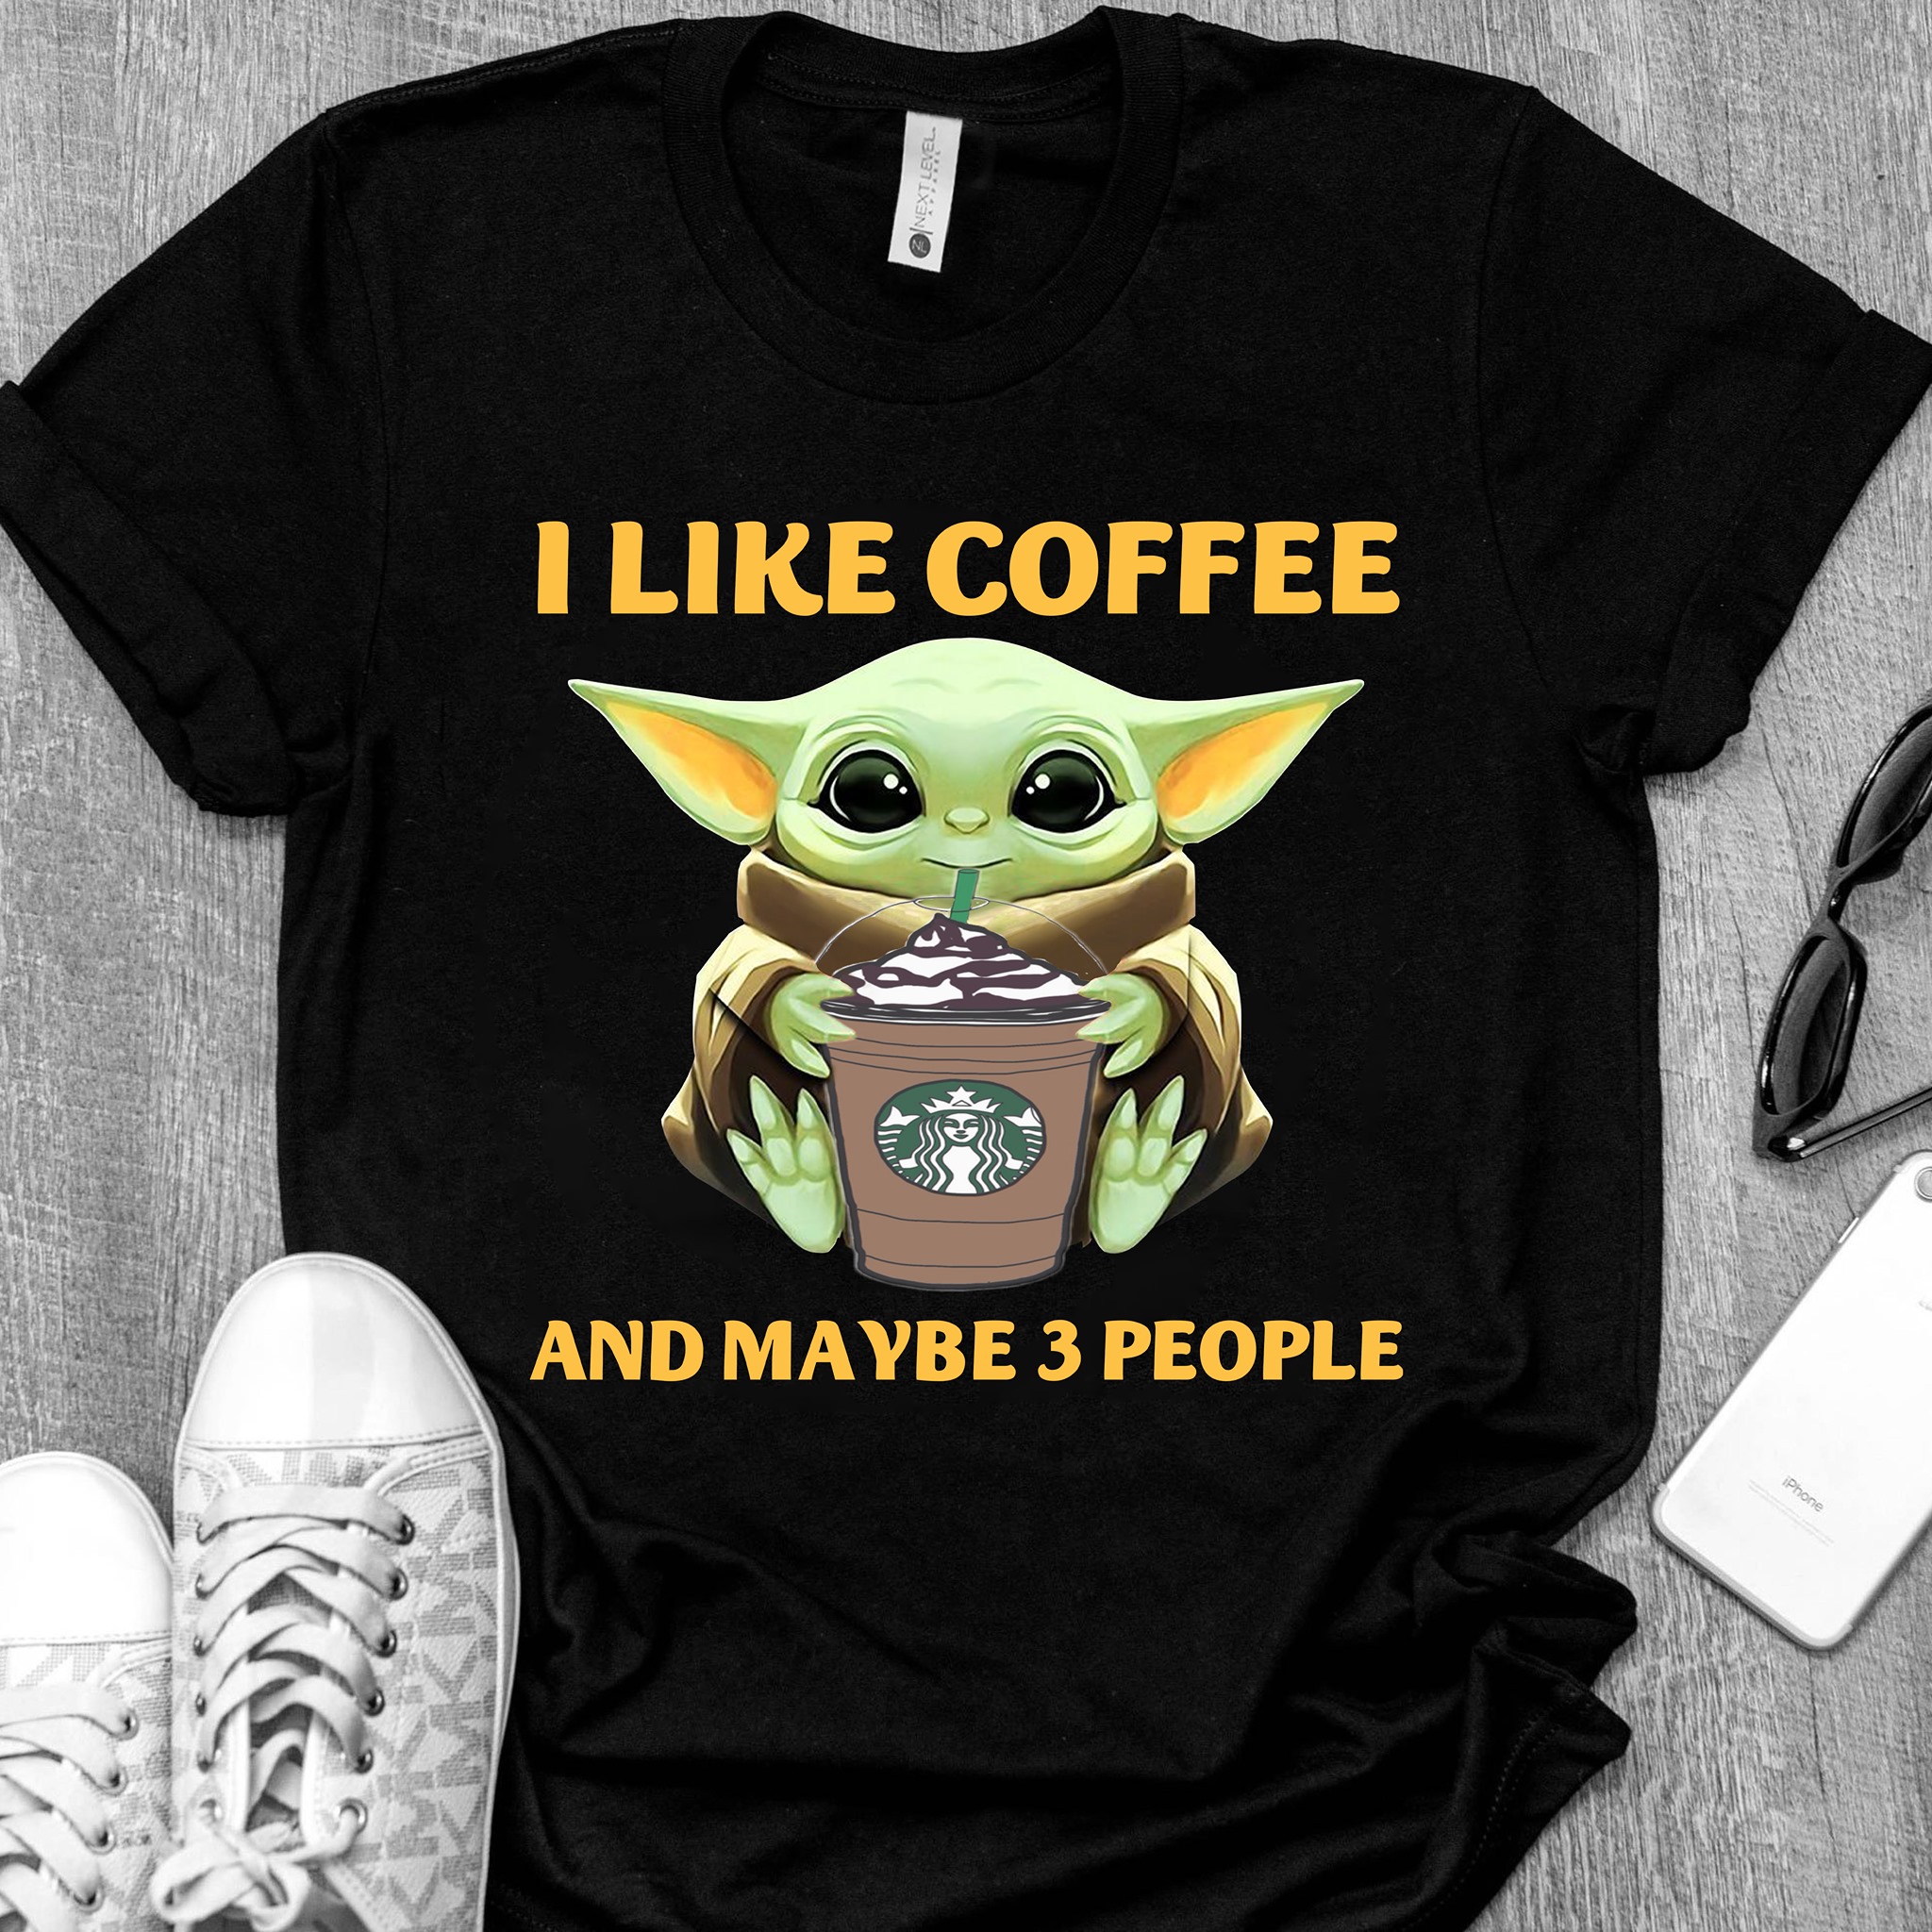 I like coffee and maybe 3 people - Yoda and starbuck